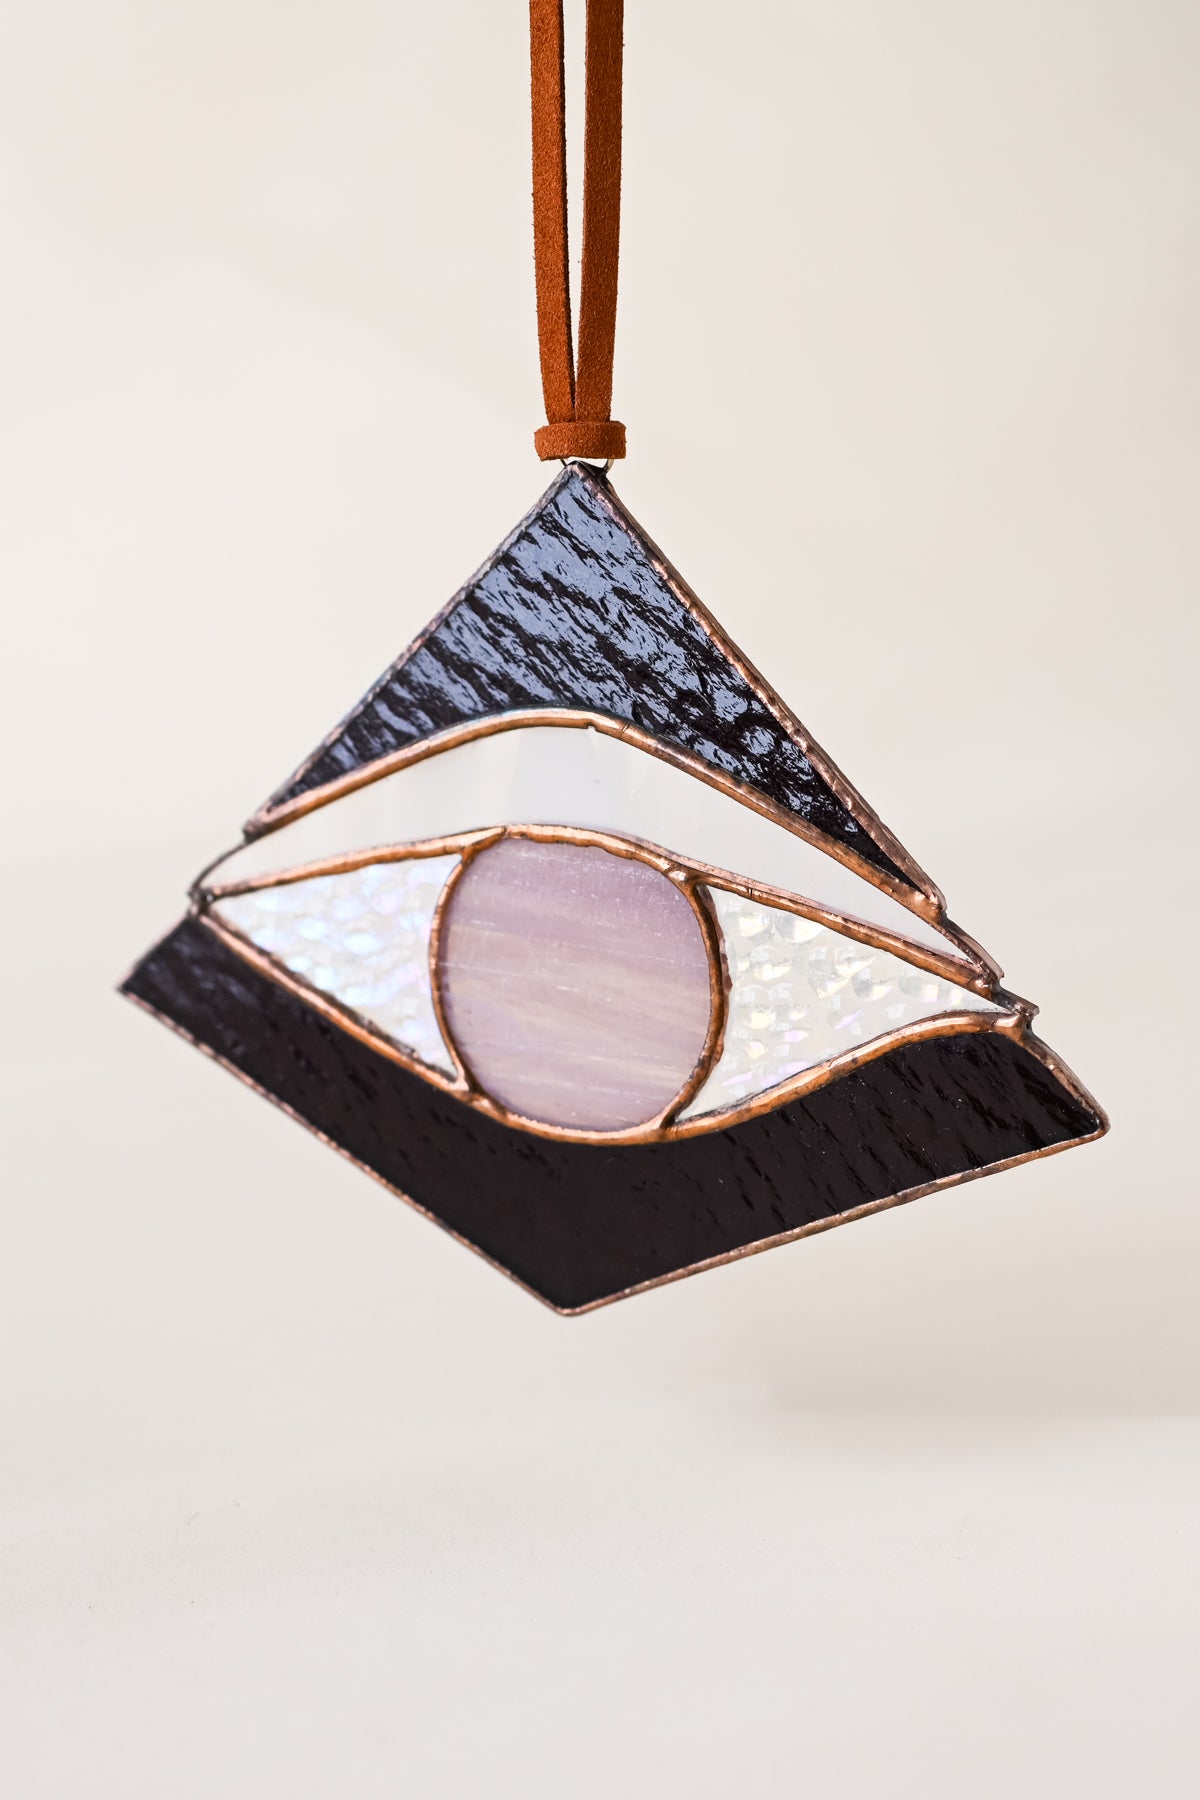 Stained Glass Third Eye XIV